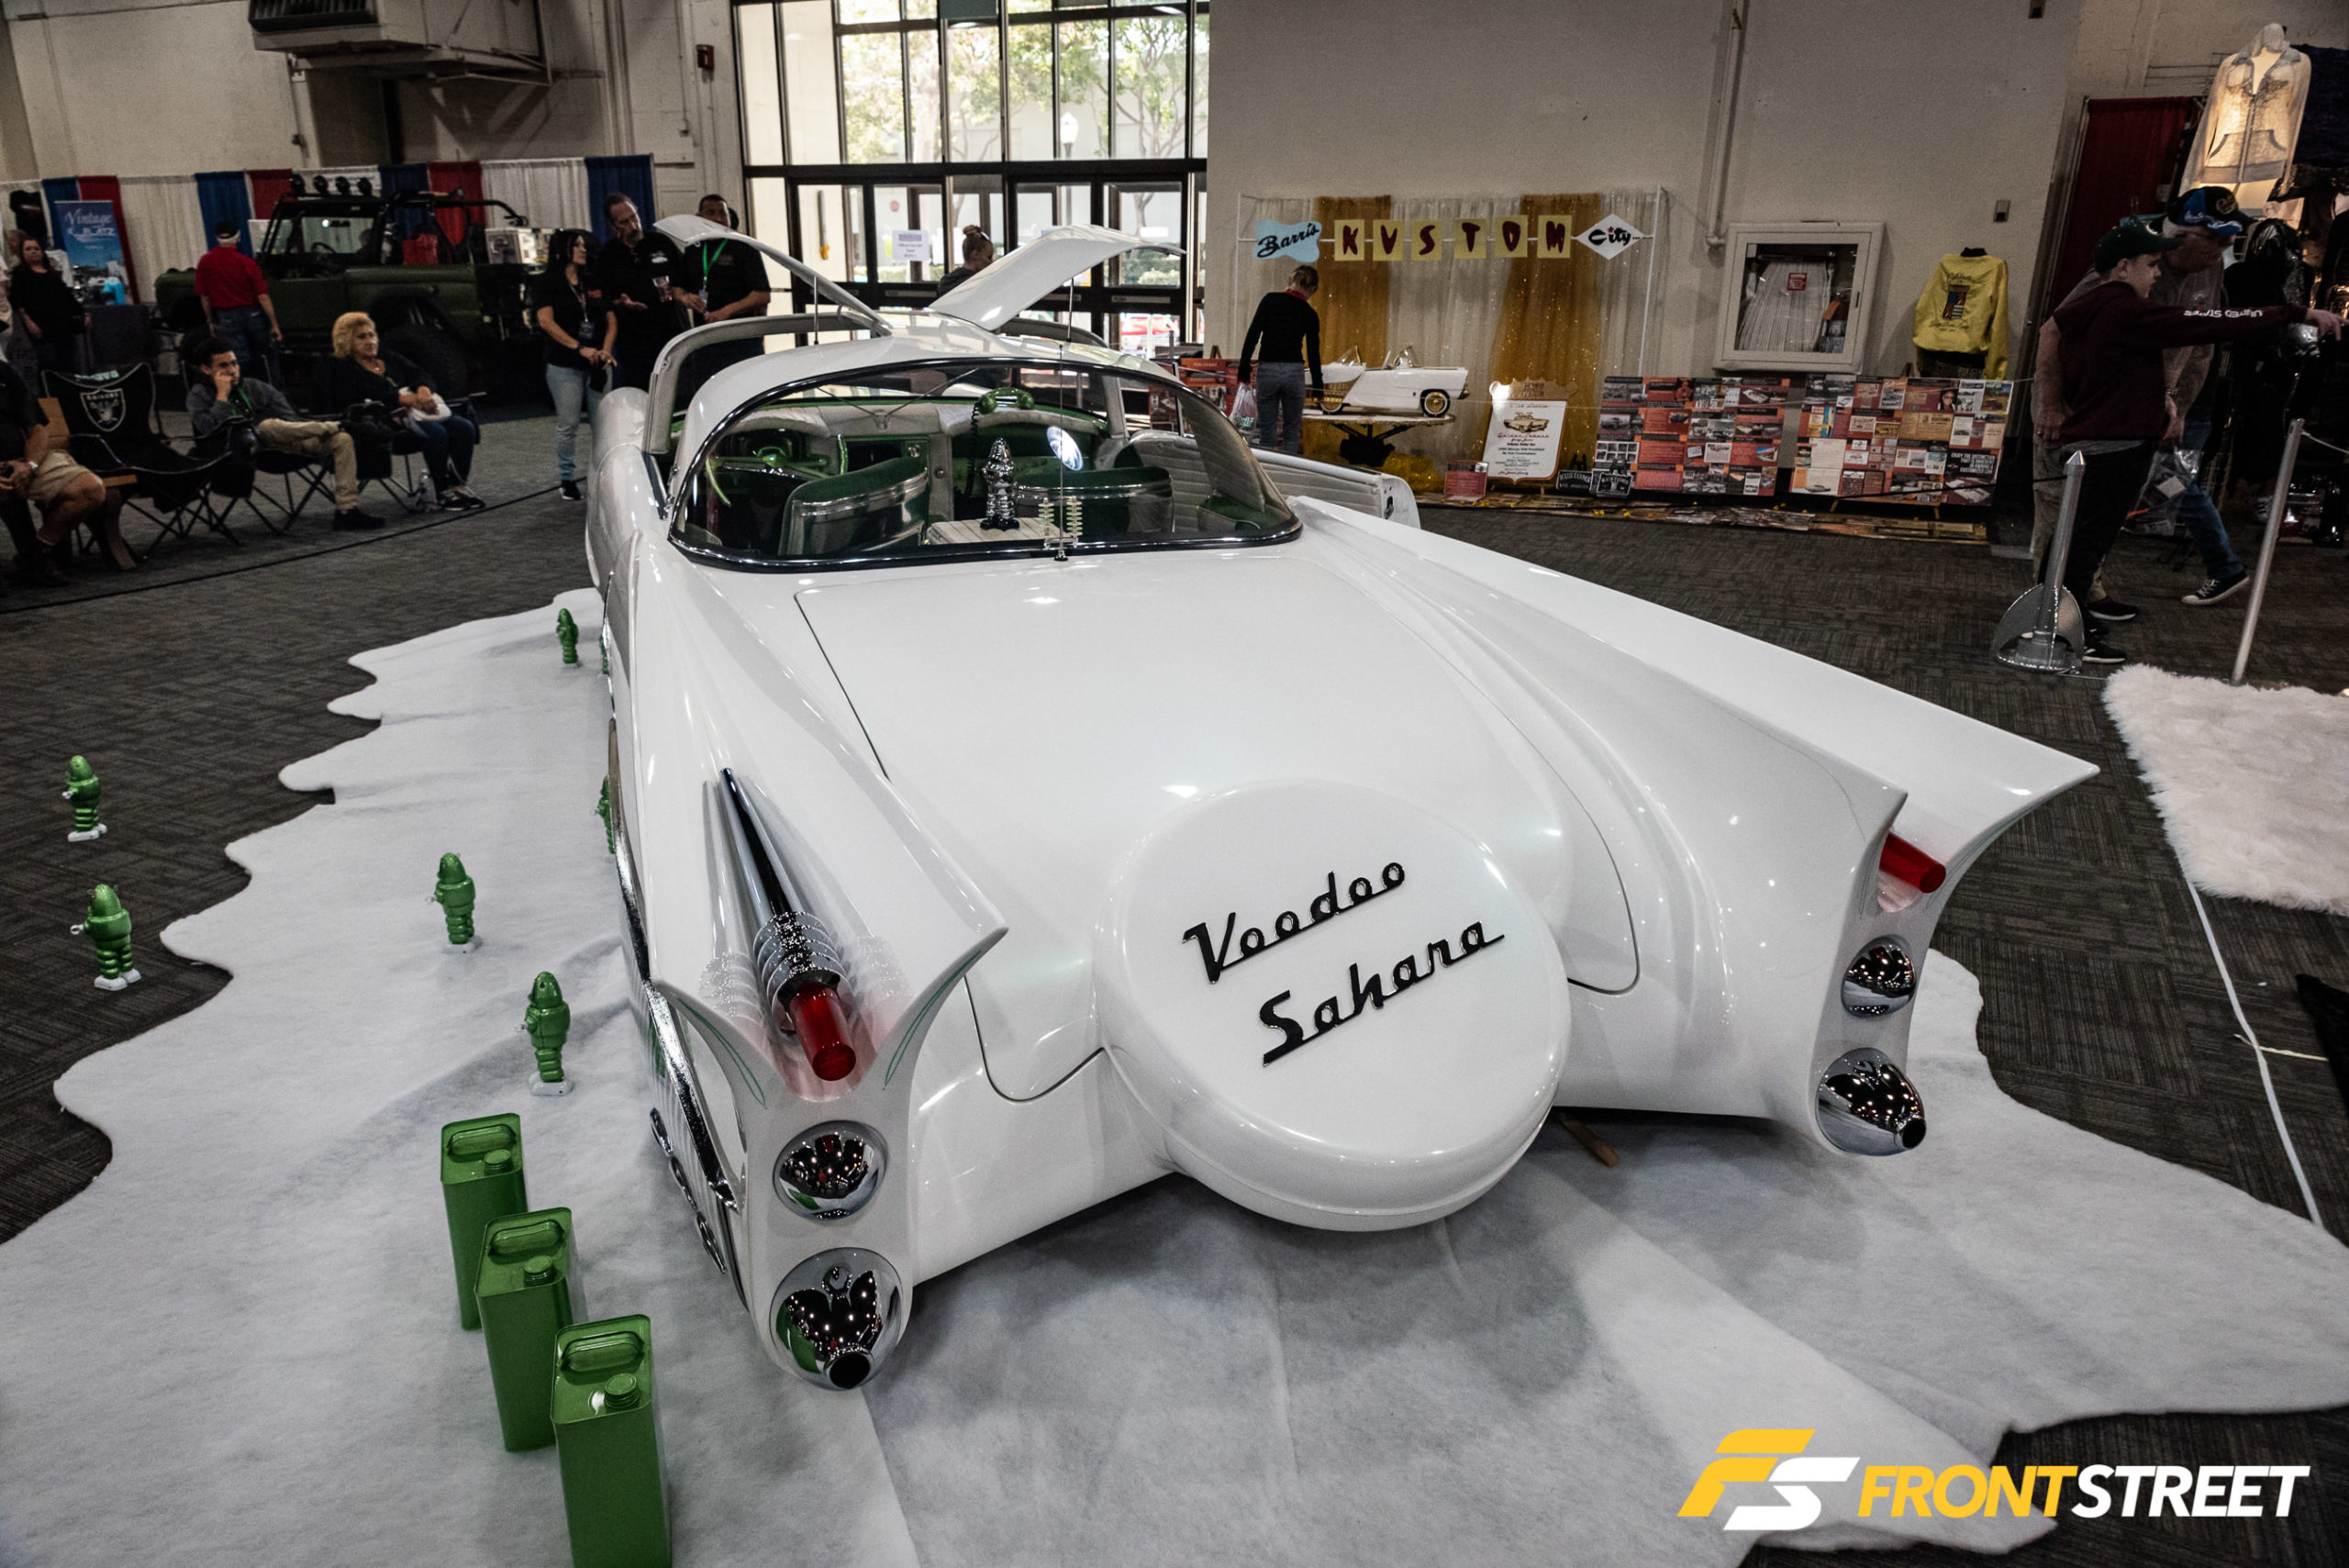 The Stunning Vehicles Of The 2020 Grand National Roadster Show